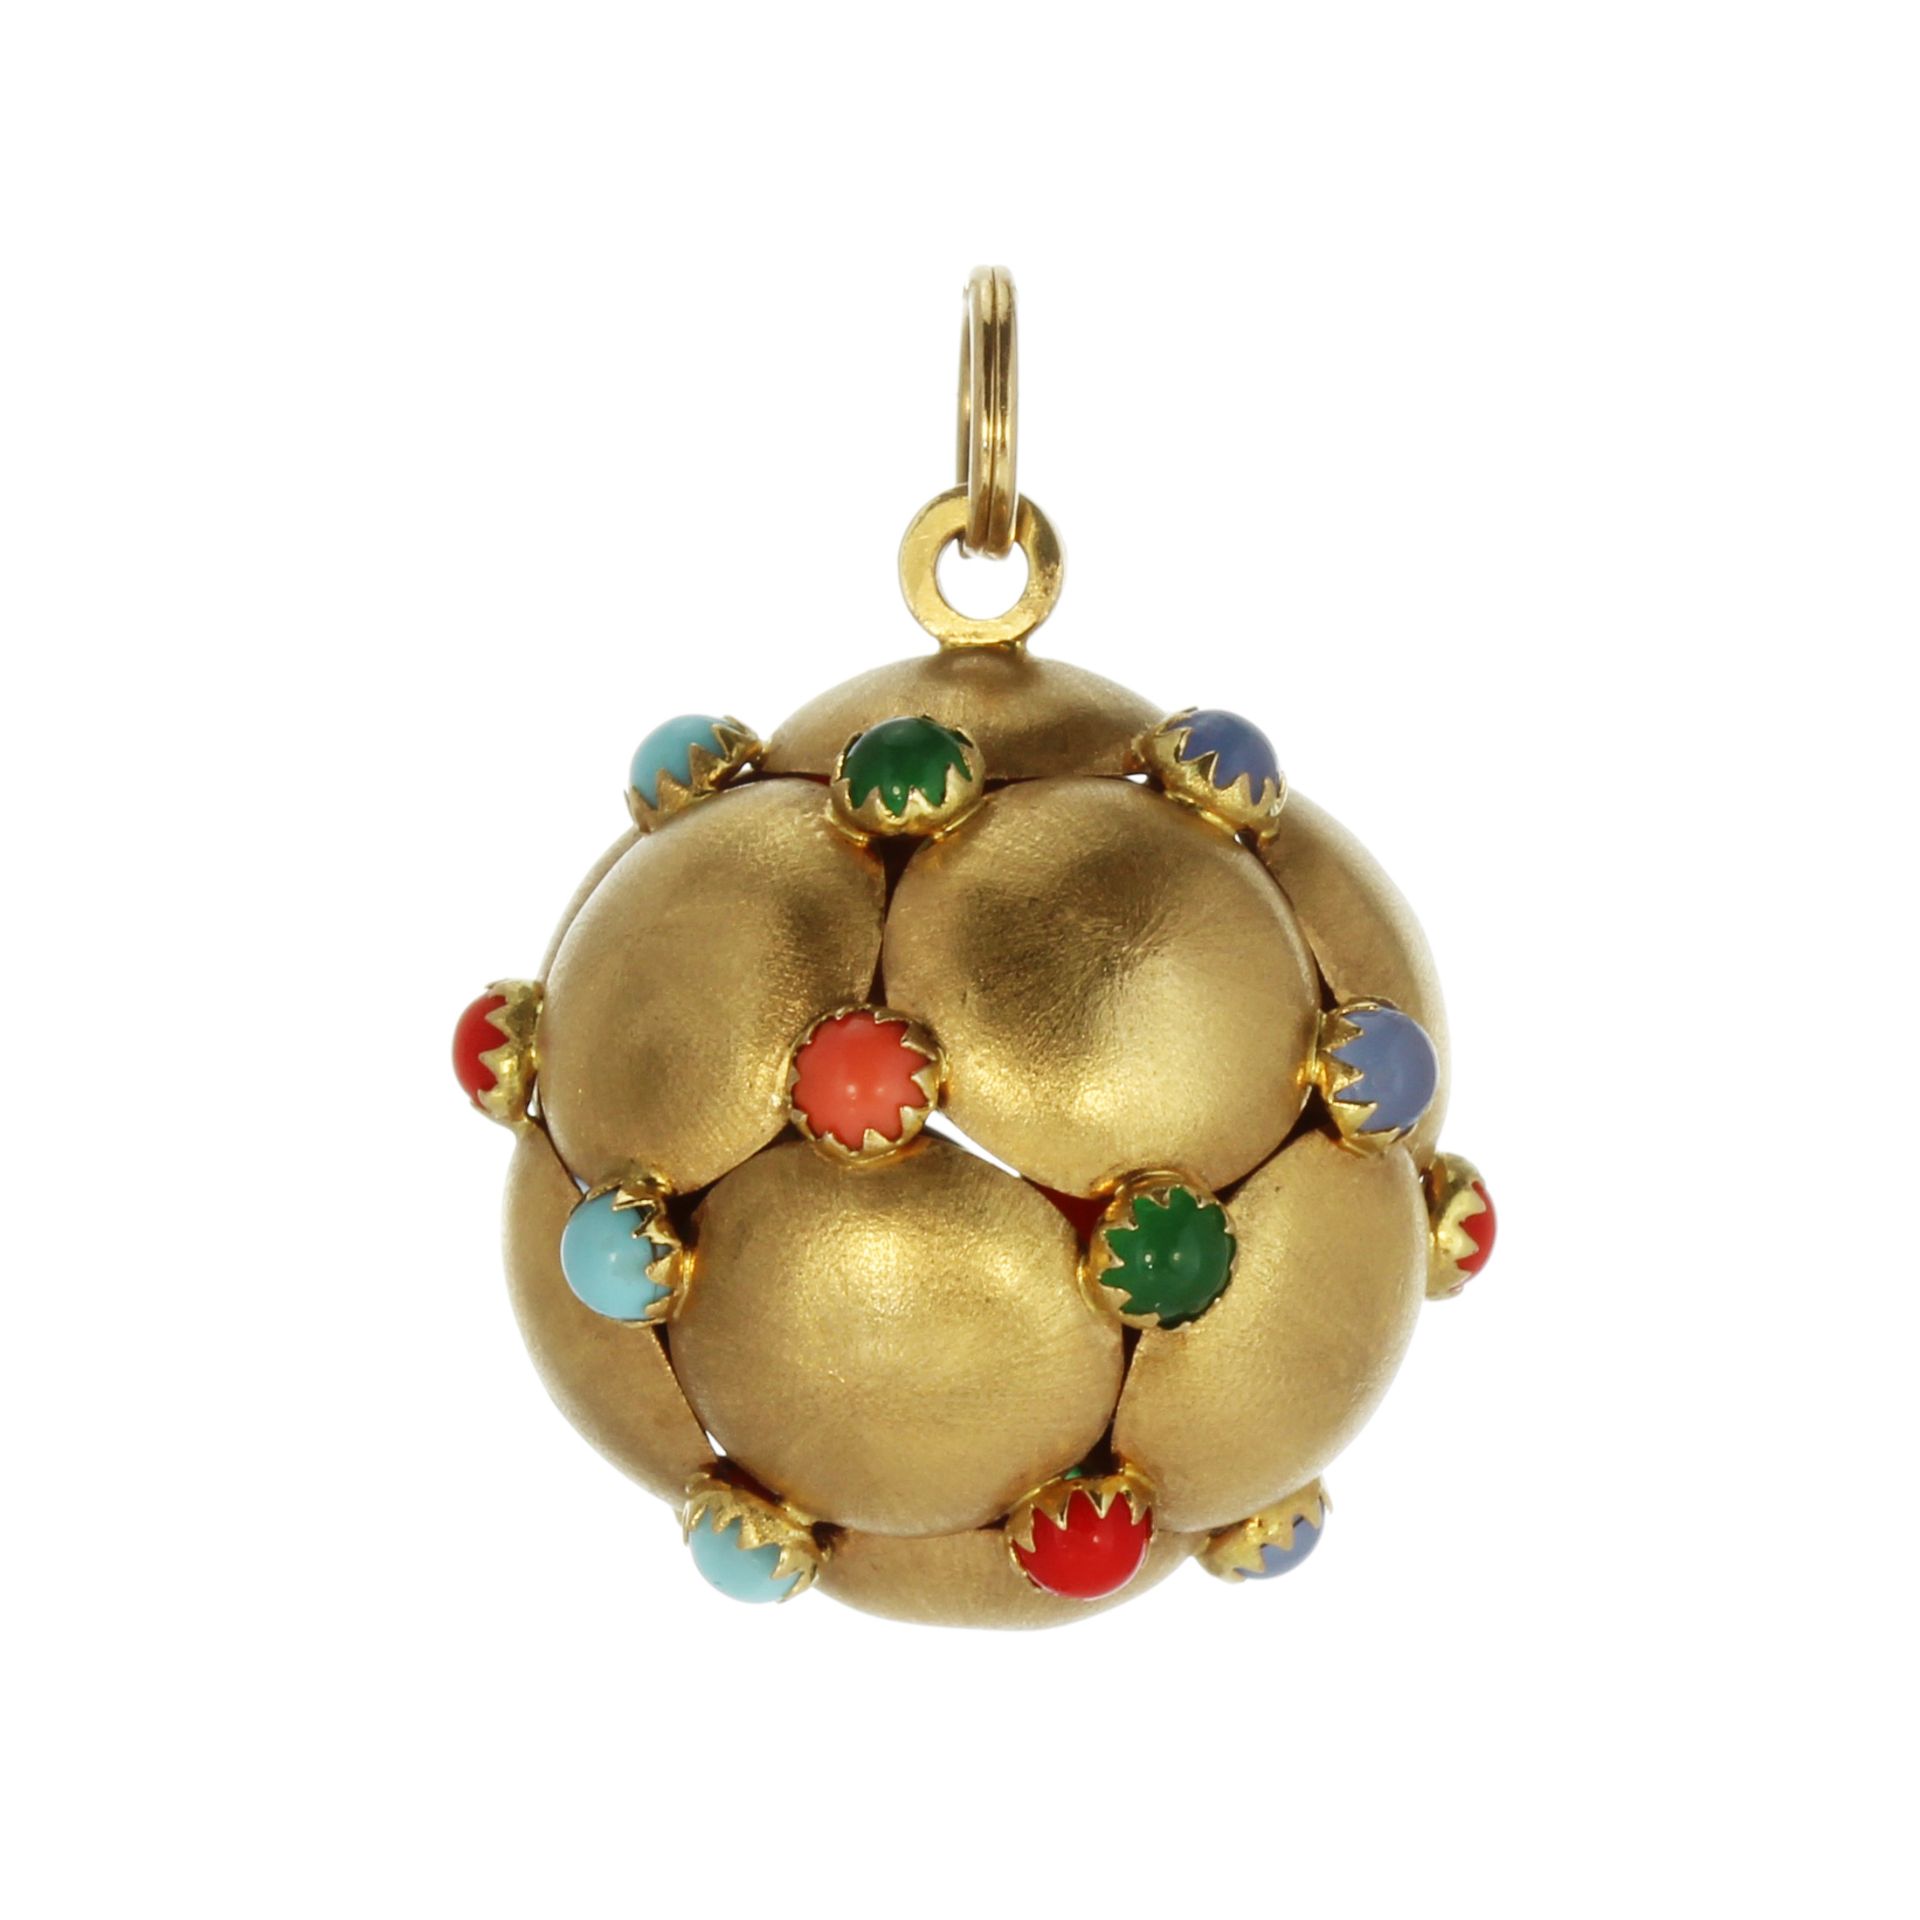 A vintage jewelled Italian ball charm / pendant in 18ct yellow gold designed as a sphere comprised